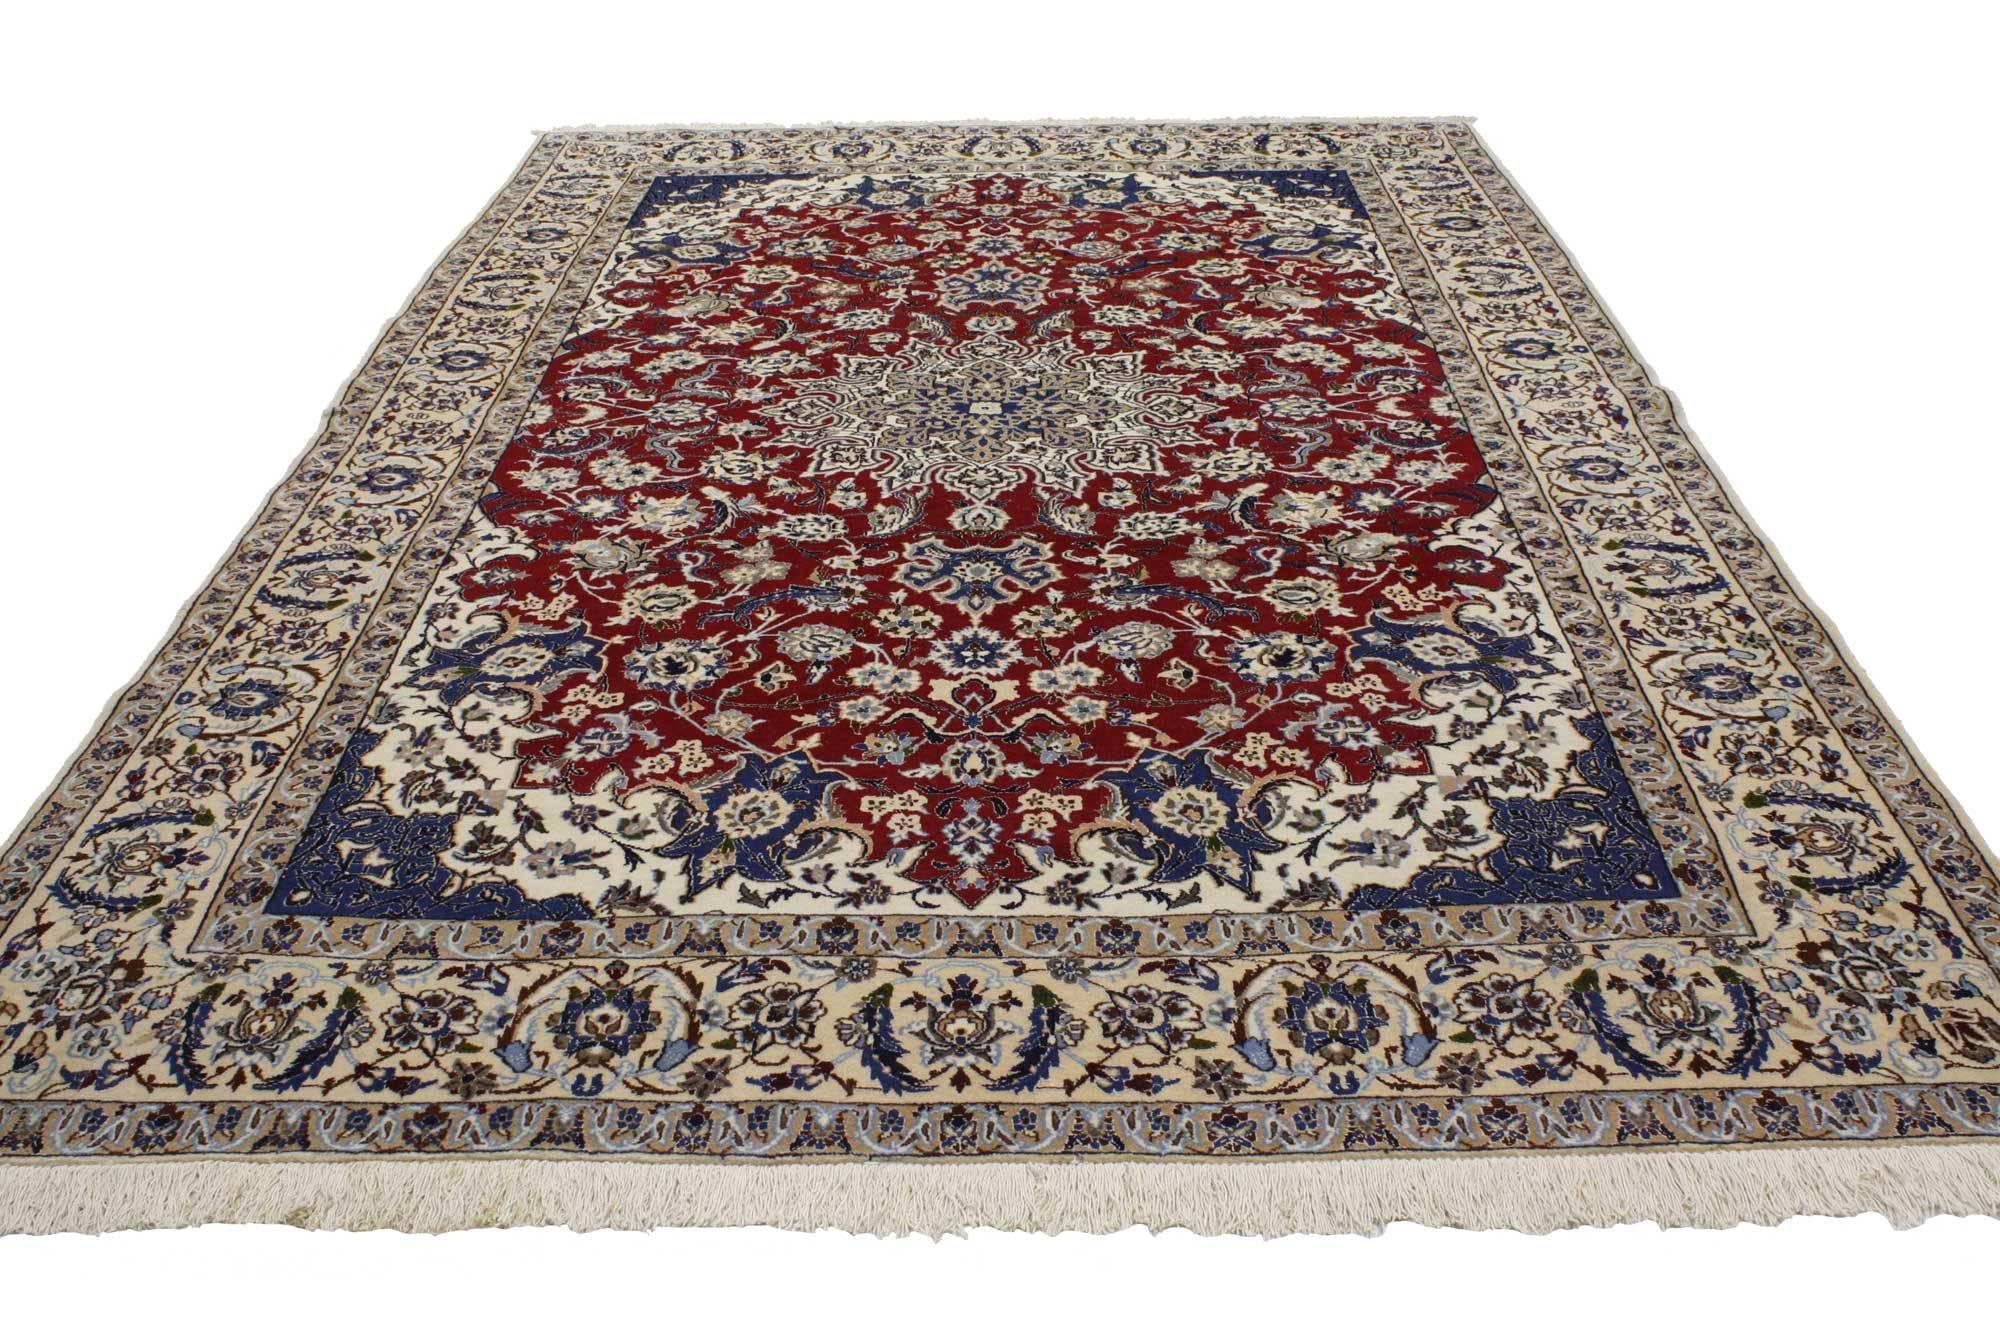 76818 Vintage Persian Nain Rug with Federal Colonial Style 06'10 x 10'08. Regal and refined, this hand-knotted wool and silk vintage Persian Nain rug features a central floral medallion and all-over floral pattern on a red and ivory cut-out field.